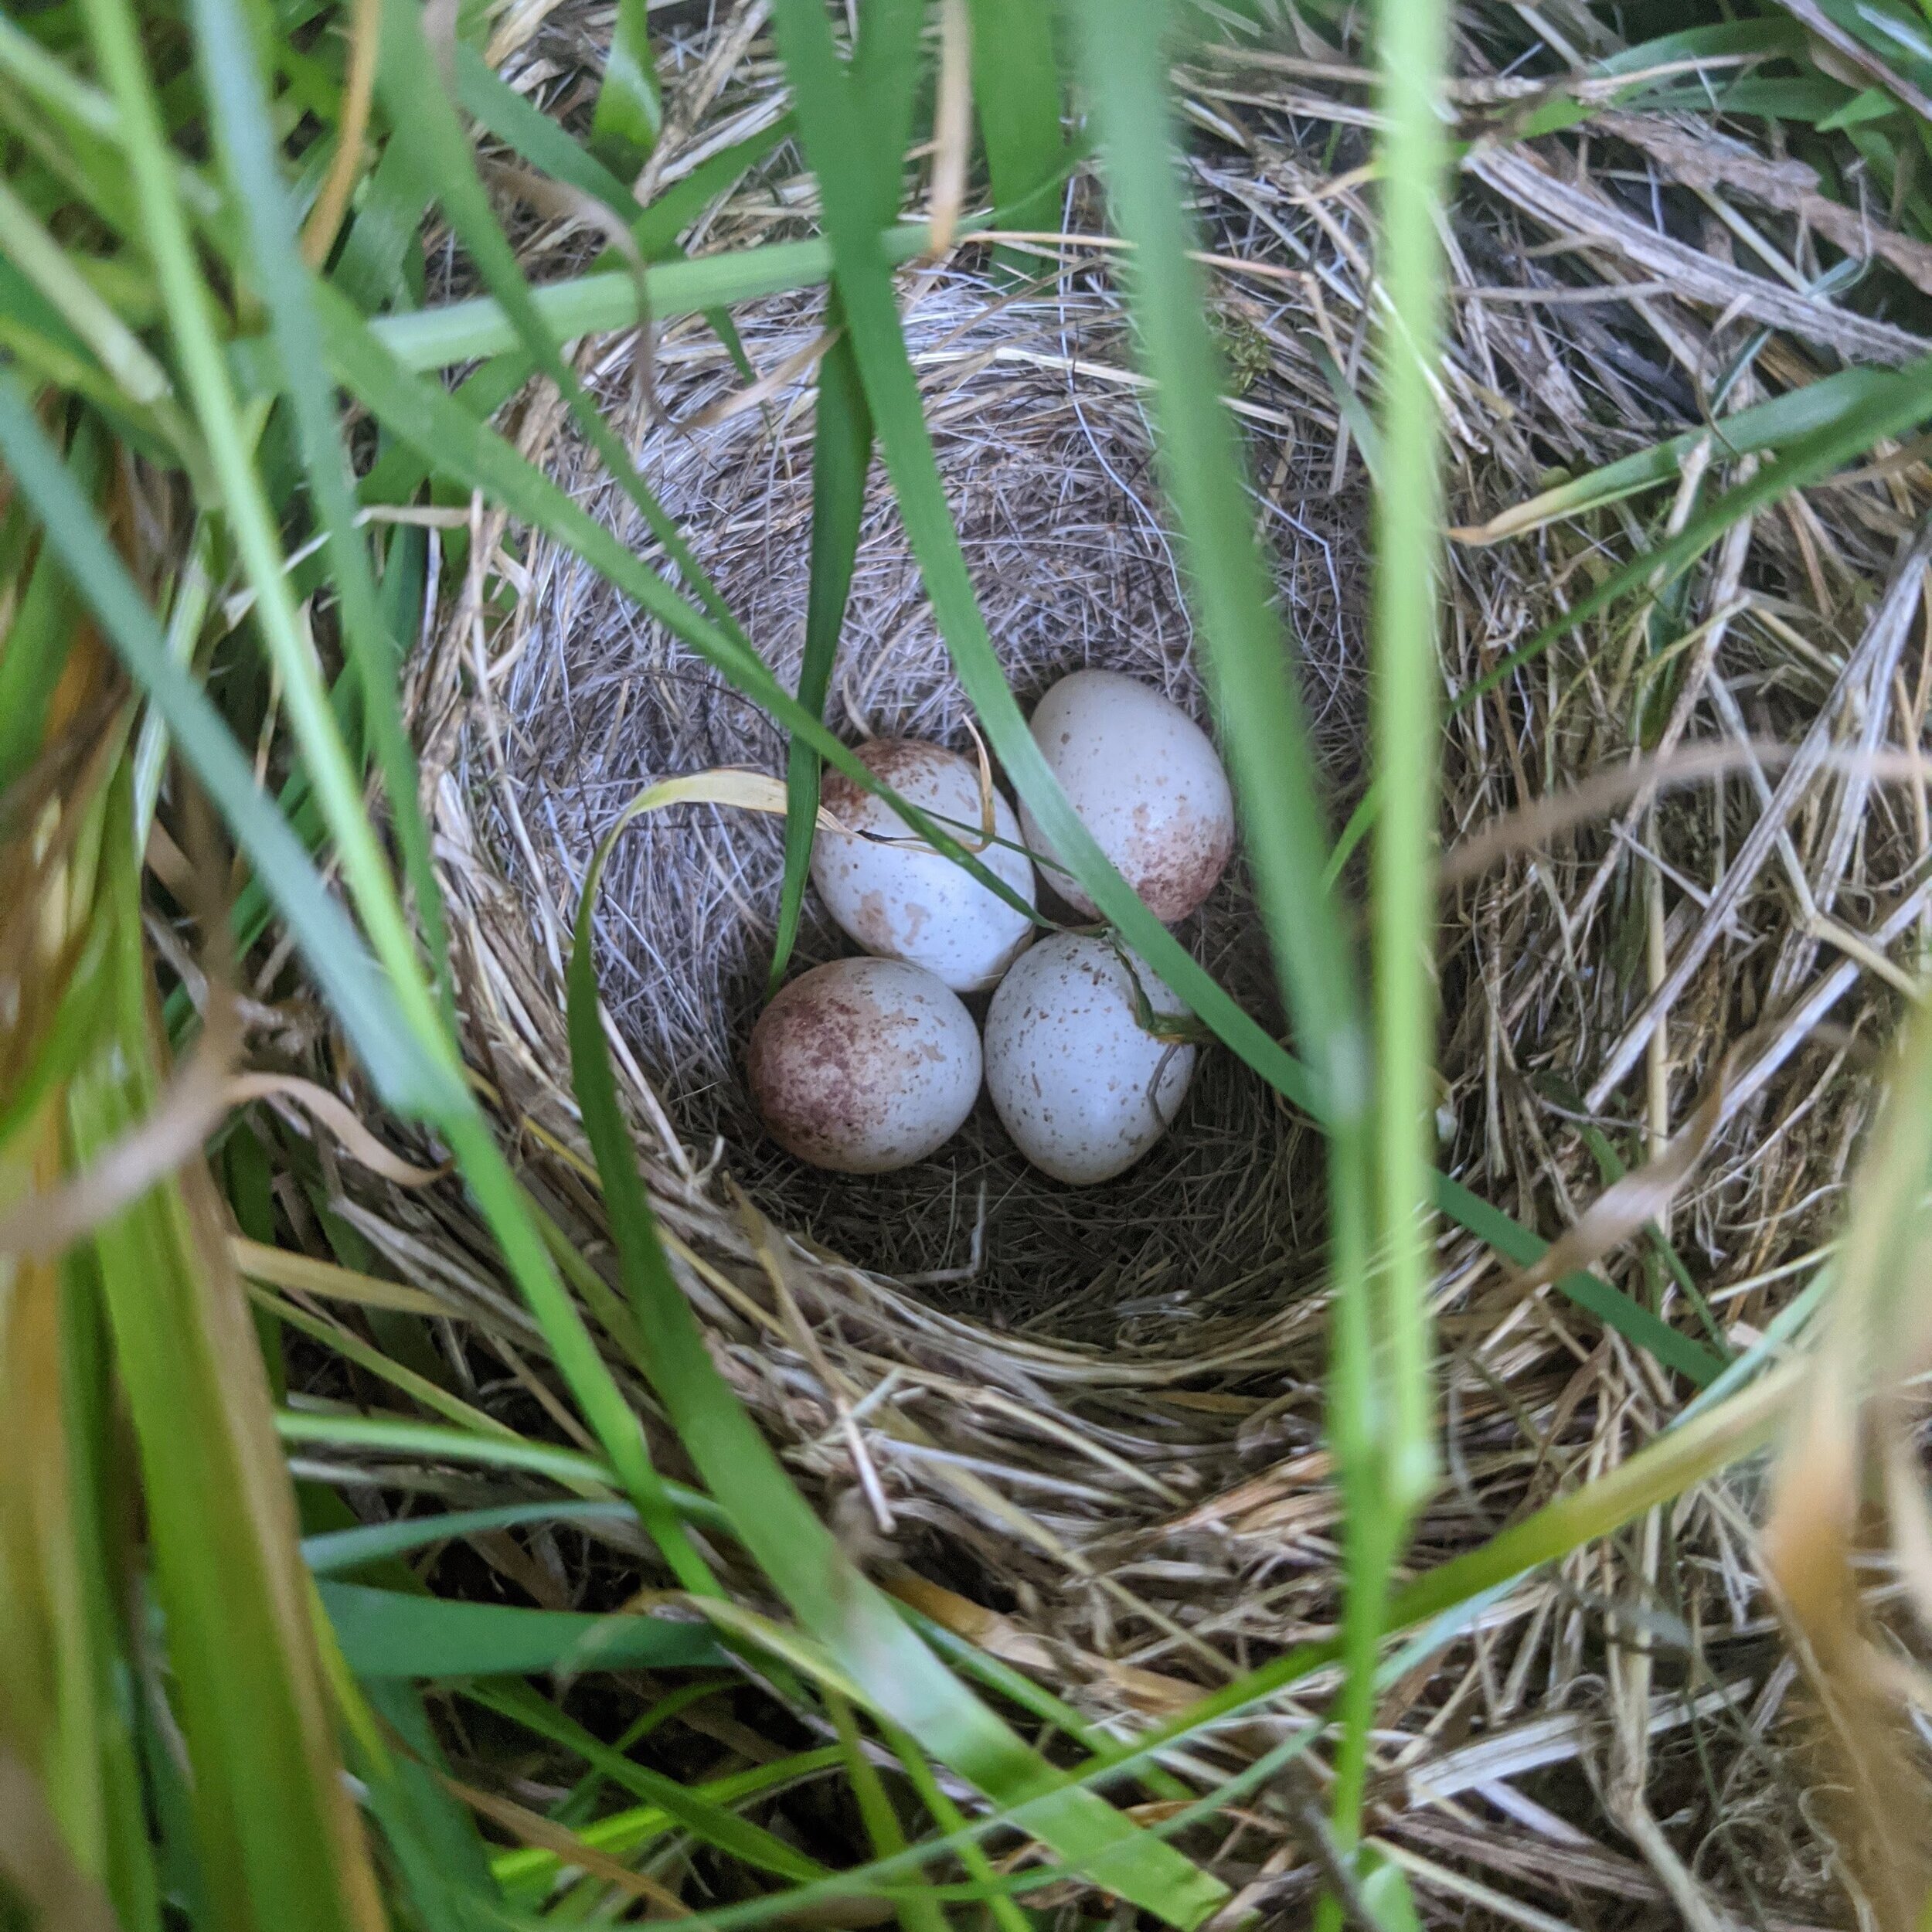  Juncos lay their eggs in a ground nest